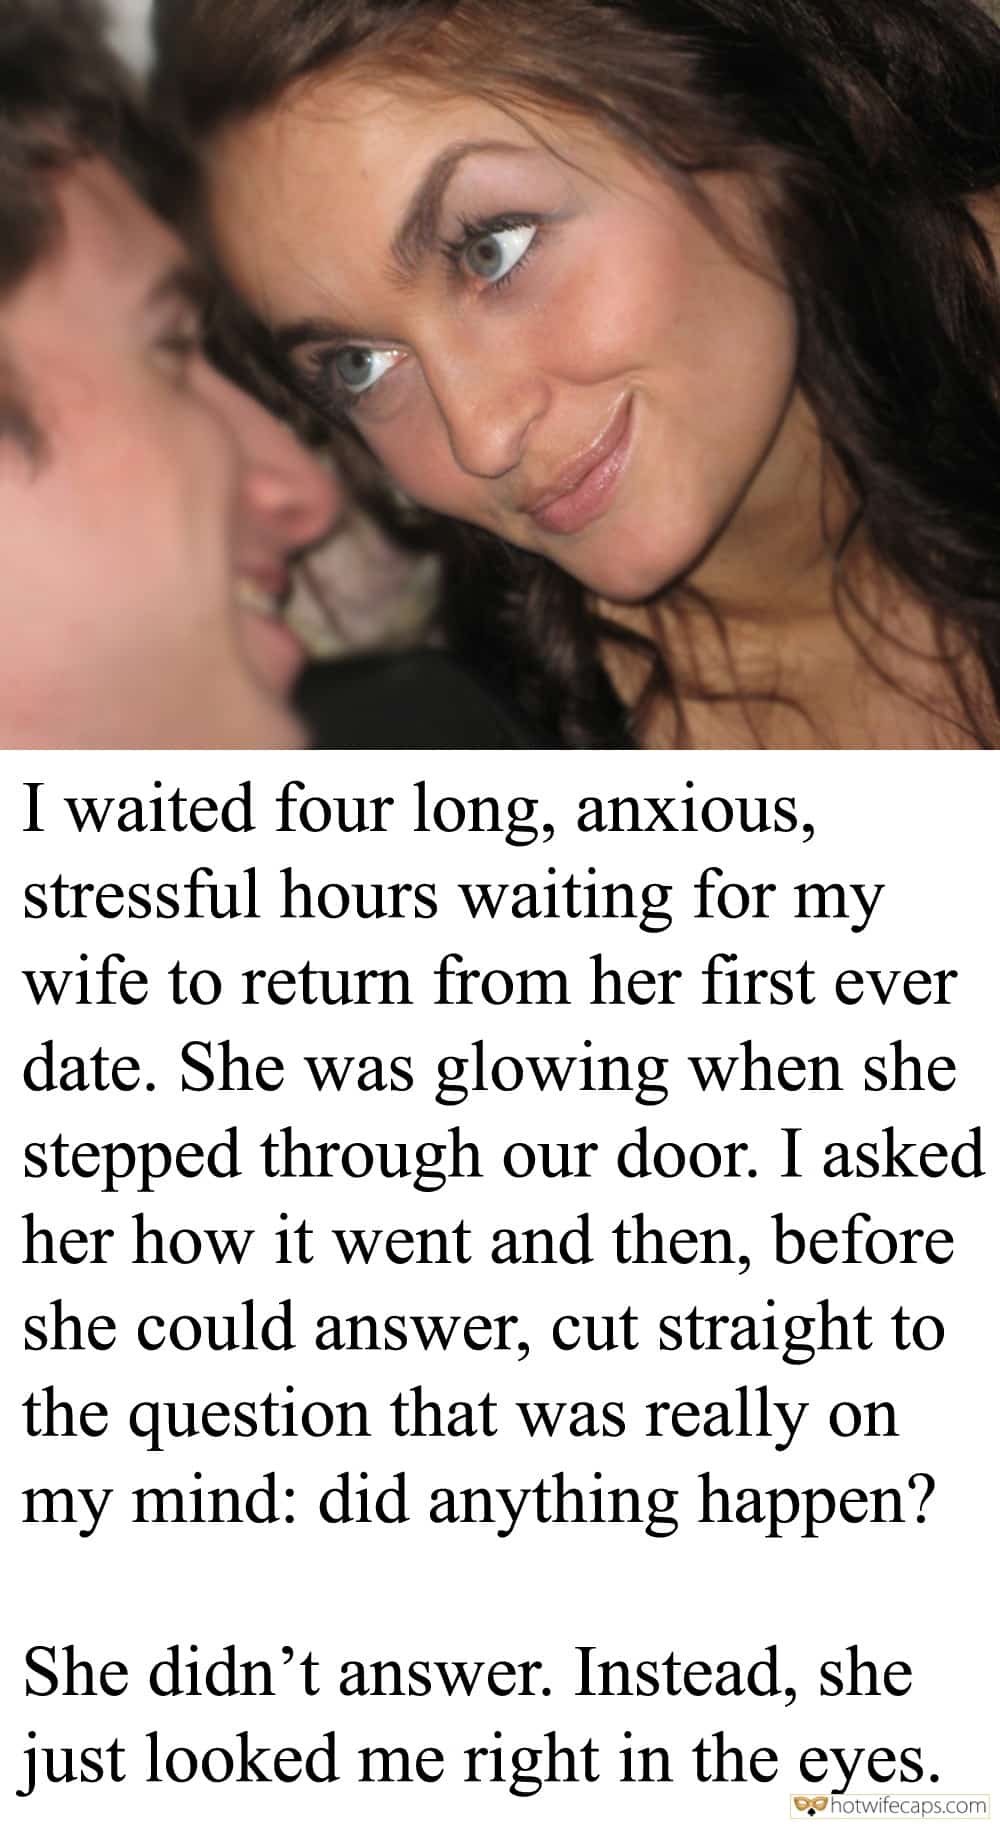 Sexy Memes Cuckold Stories hotwife caption: I waited four long, anxious, stressful hours waiting for my wife to return from her first ever date. She was glowing when she stepped through our door. I asked her how it went and then, before she could answer, cut...